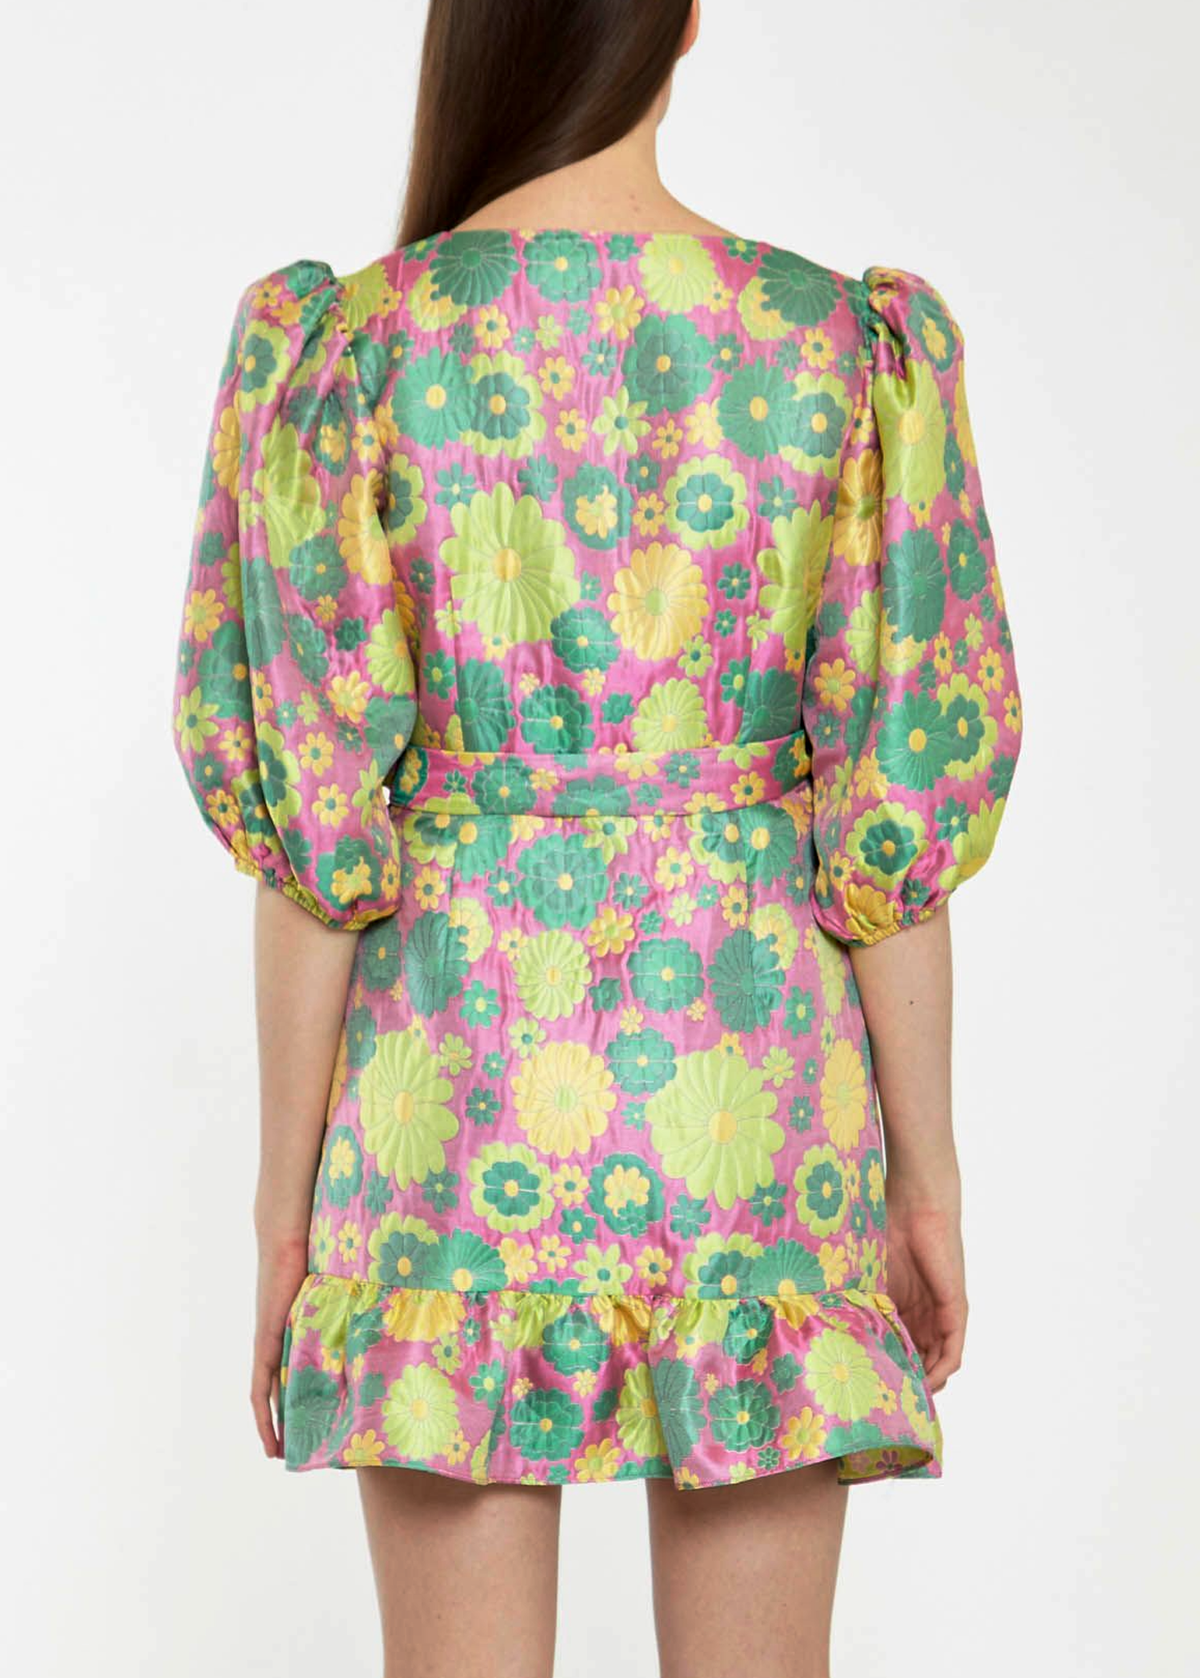 60s inspired brocade floral wrap mini dress with puff sleeves and ruffle hem, in pink, yellow, and green, by Glamorous UK